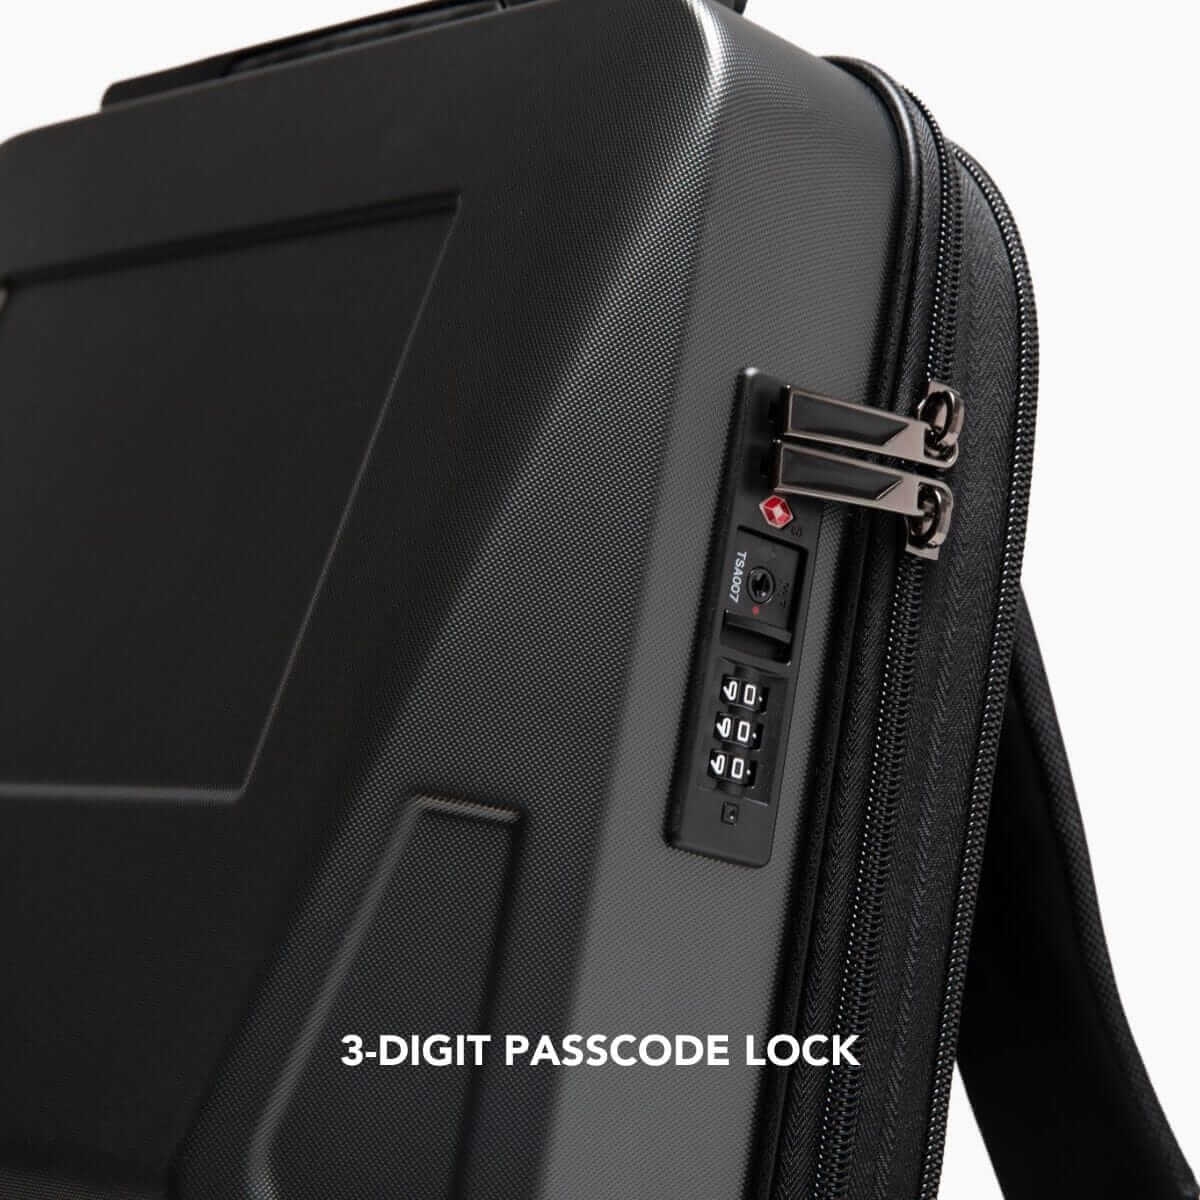 Tesla Cybertruck Cyber Black Backpacks Luggage and Travel Accessories.